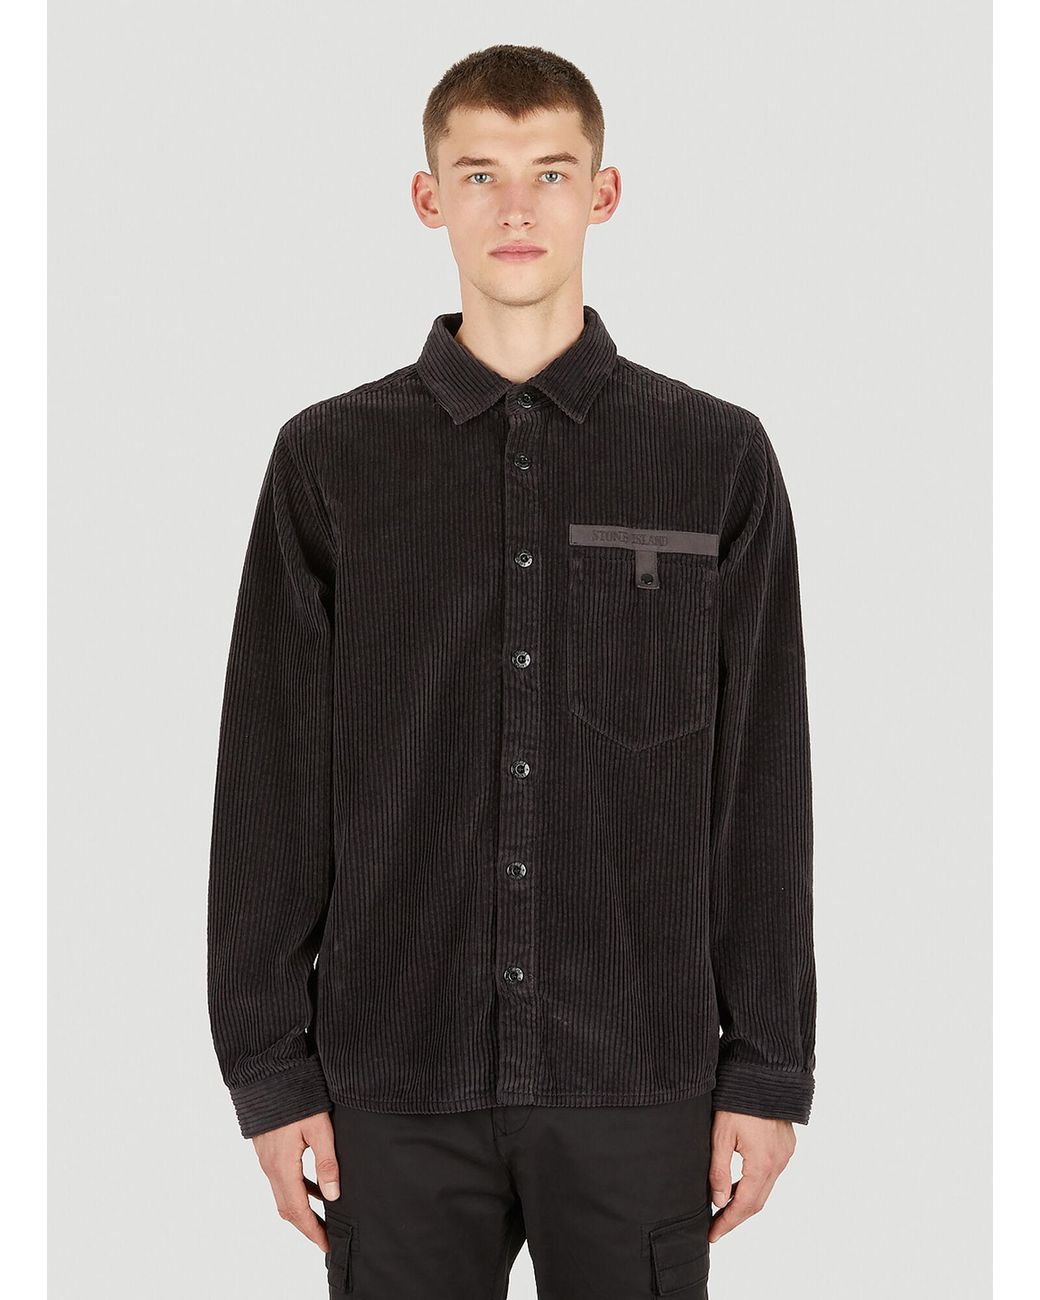 Stone Island Cord Overshirt in Black for Men | Lyst